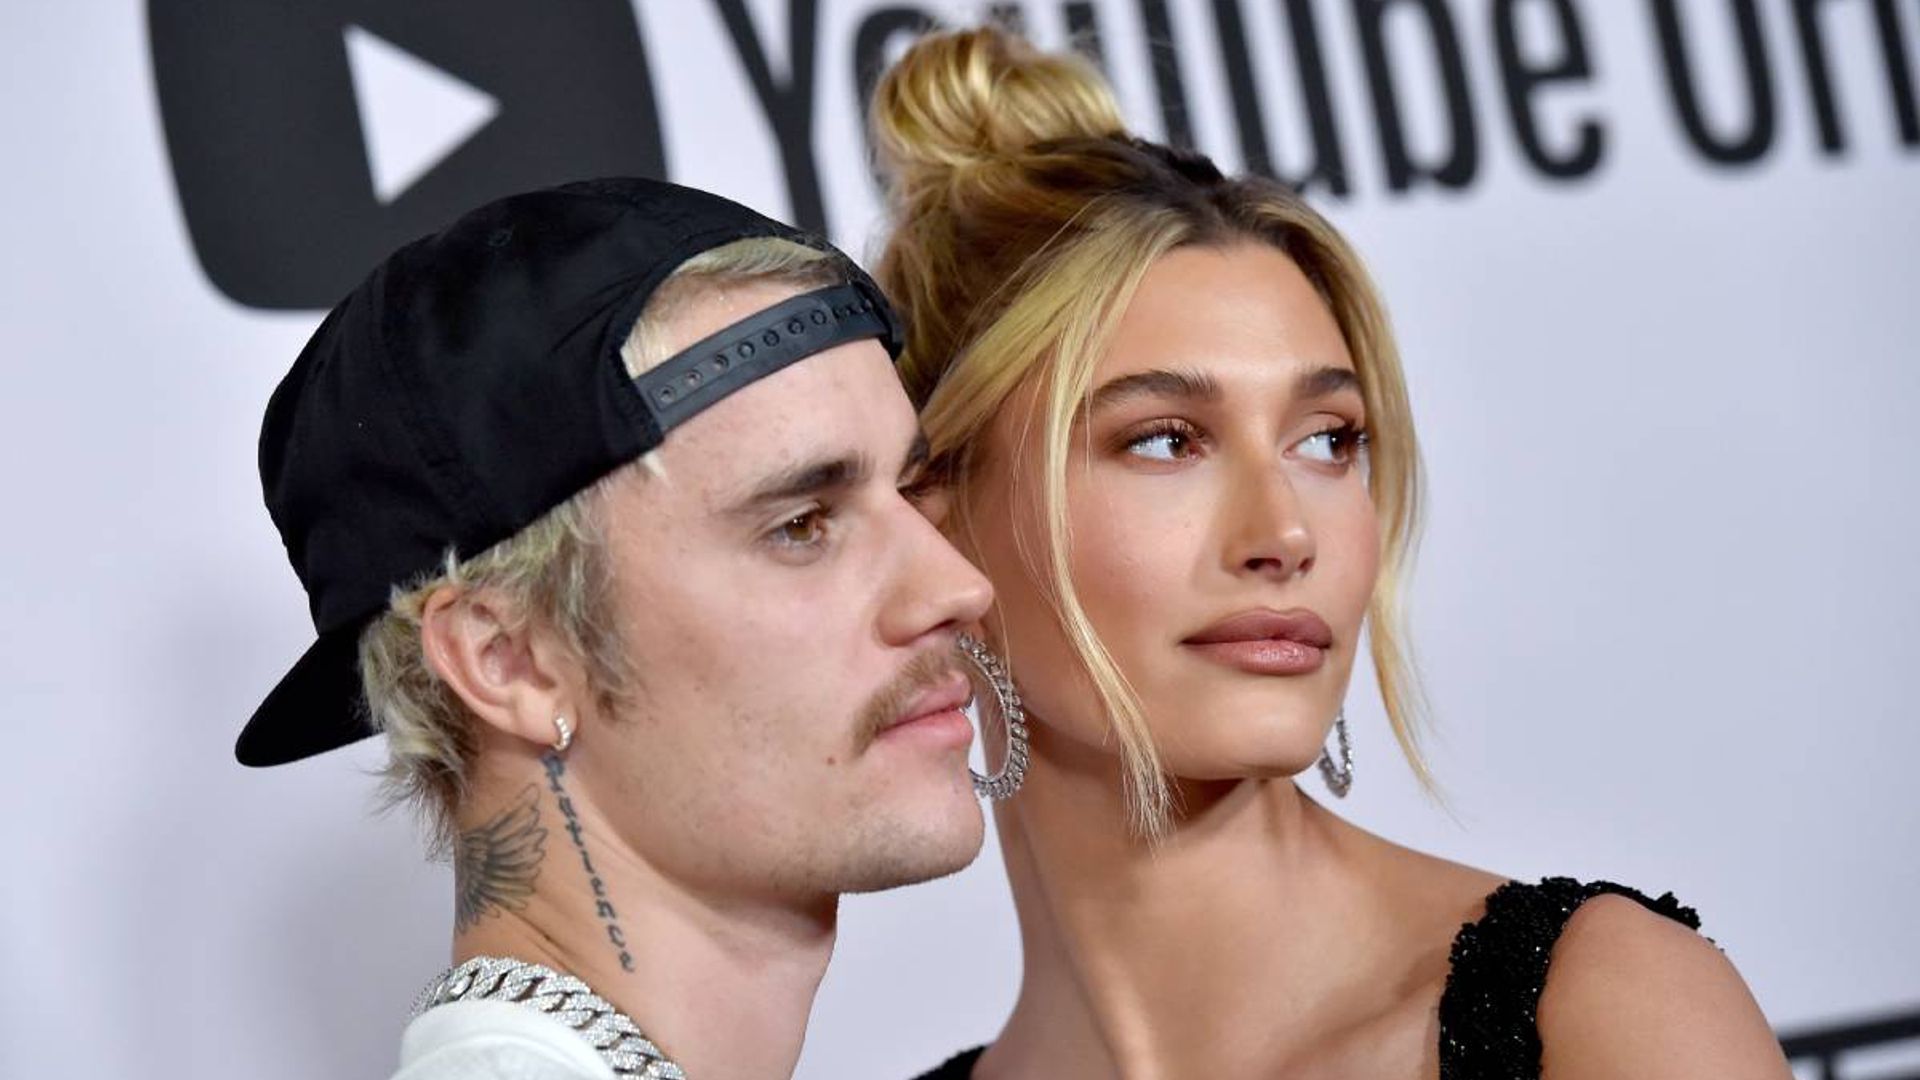 Hailey and Justin Bieber's bedroom inside $25million mansion is totally unexpected - see full view of their sleep space